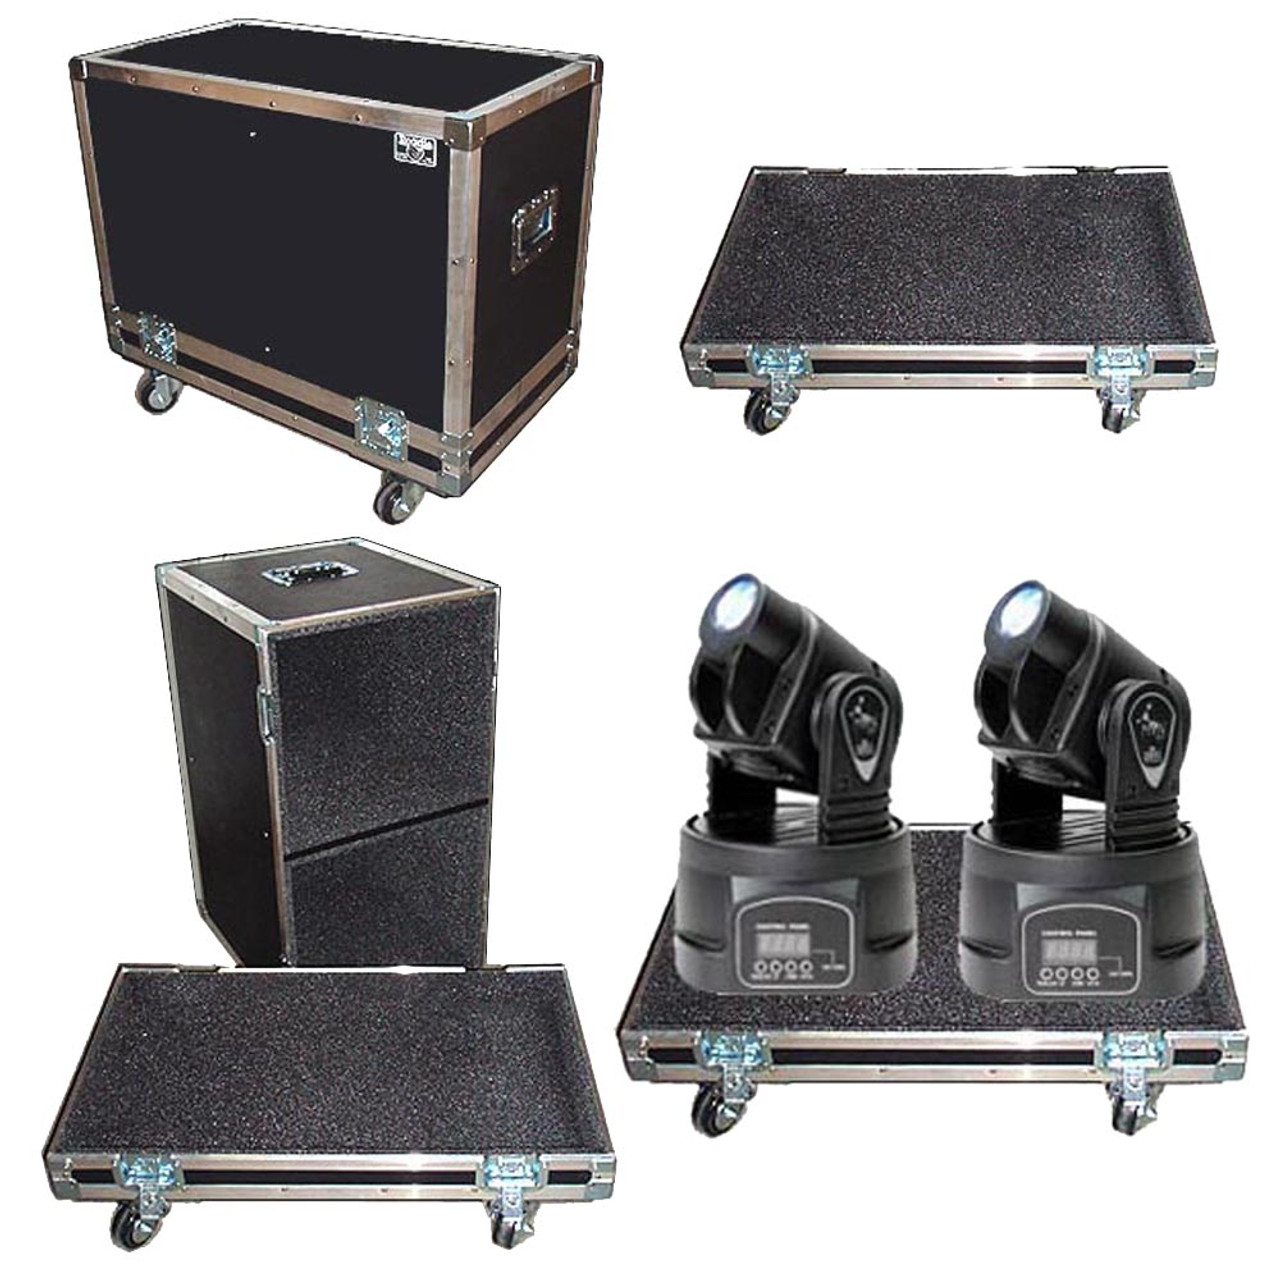 Moving Head 2 in 1 Tray Style ATA Lighting Case by Brand